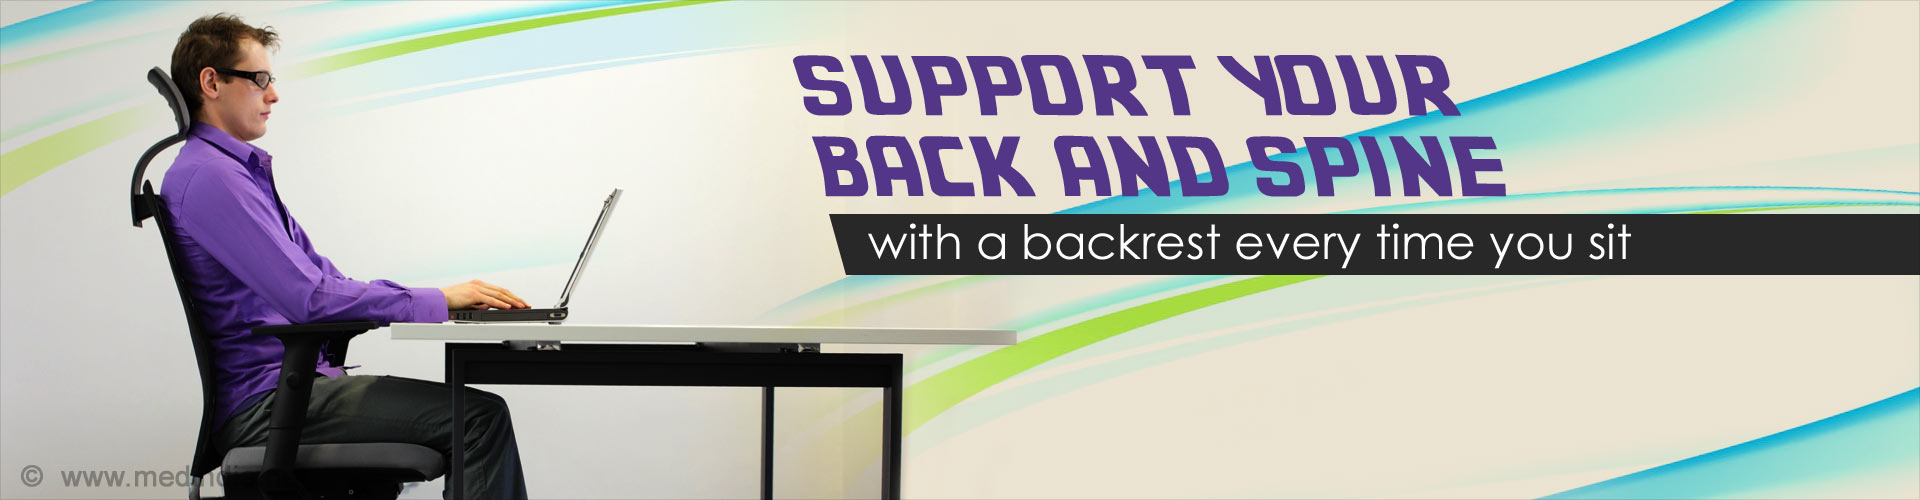 Support your back and spine with a backrest every time you sit. 
